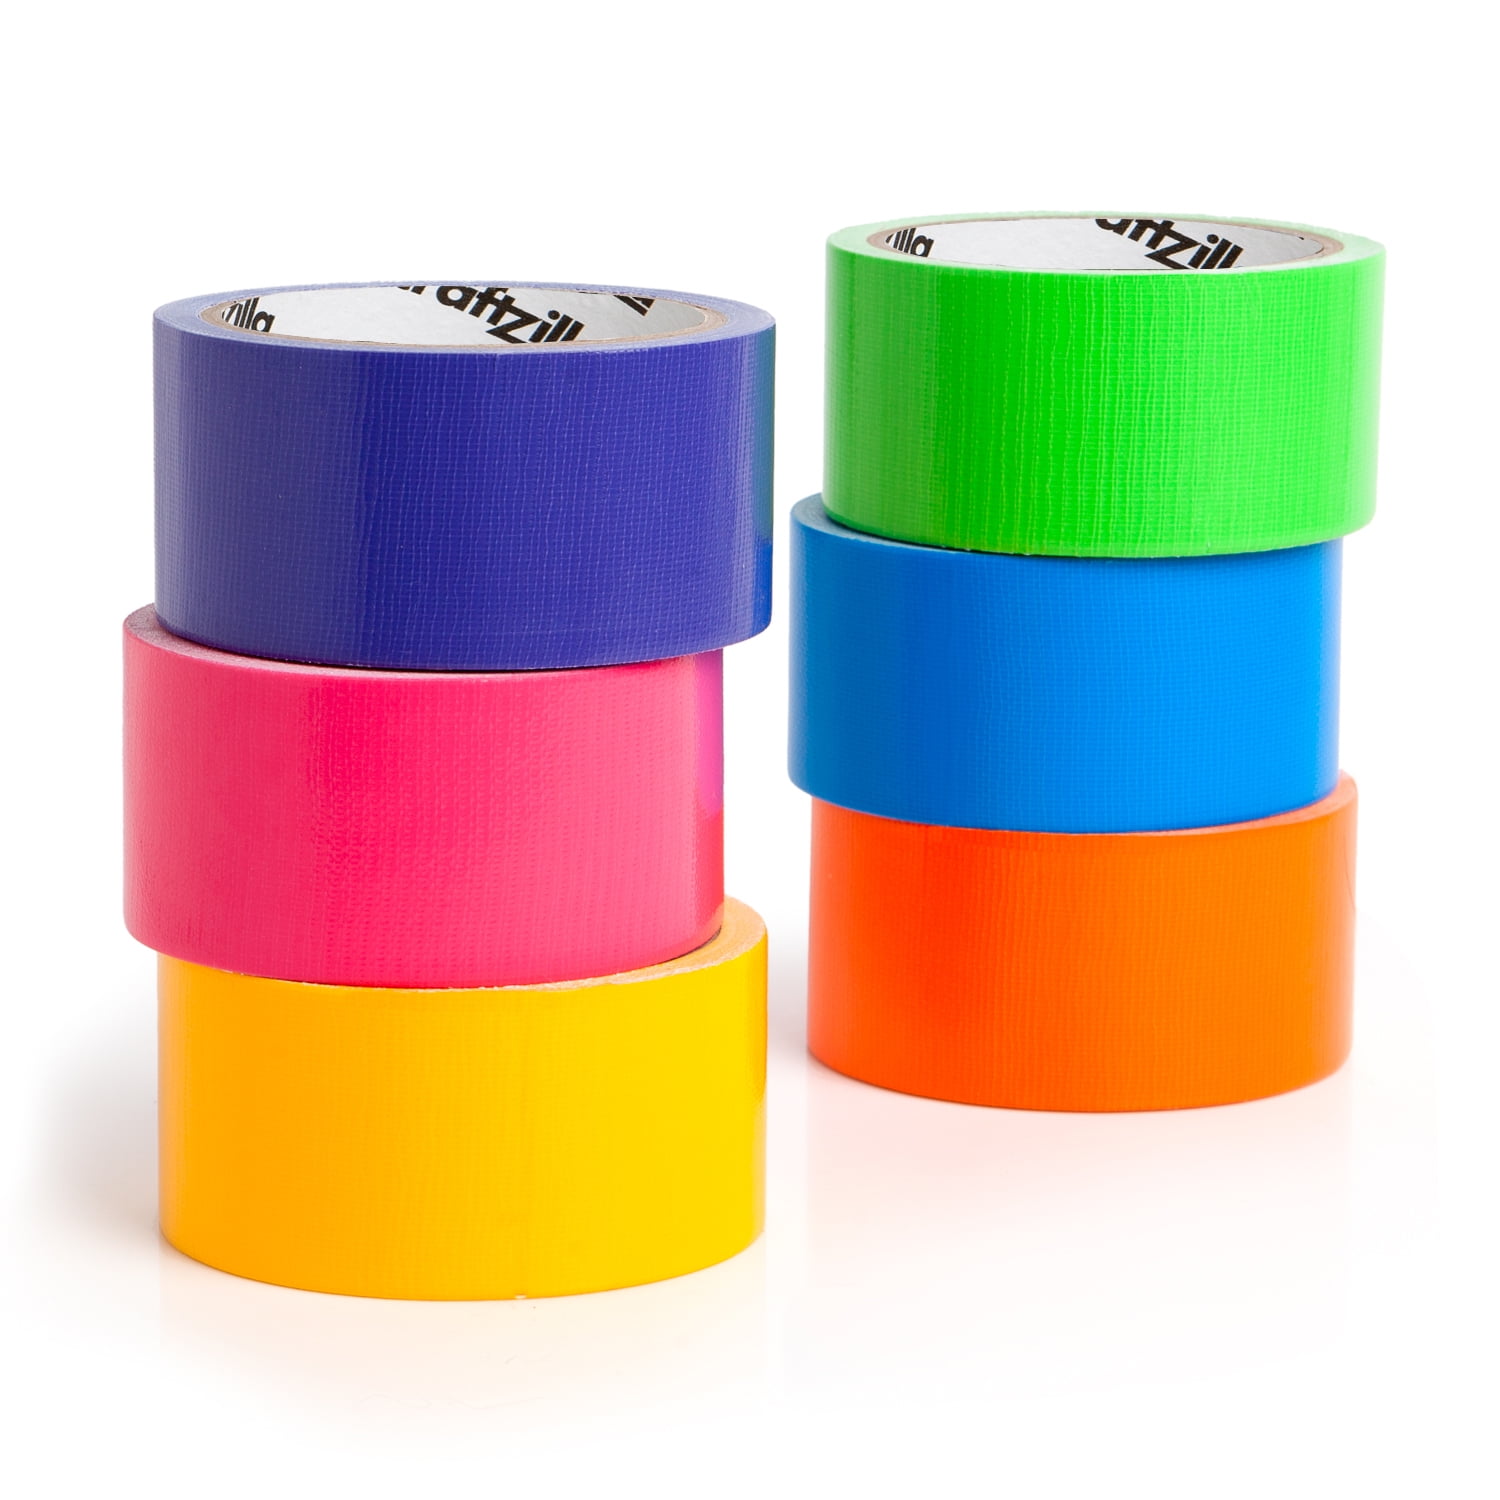 AMOGATO Colored Duct Tape - 1 Inch x 10 Yards per Rolls,Multi-Color Duct  Tapes, Rainbow Colored Duct Tape Great for DIY Art Home School Office  Assorted Colors: : Industrial & Scientific